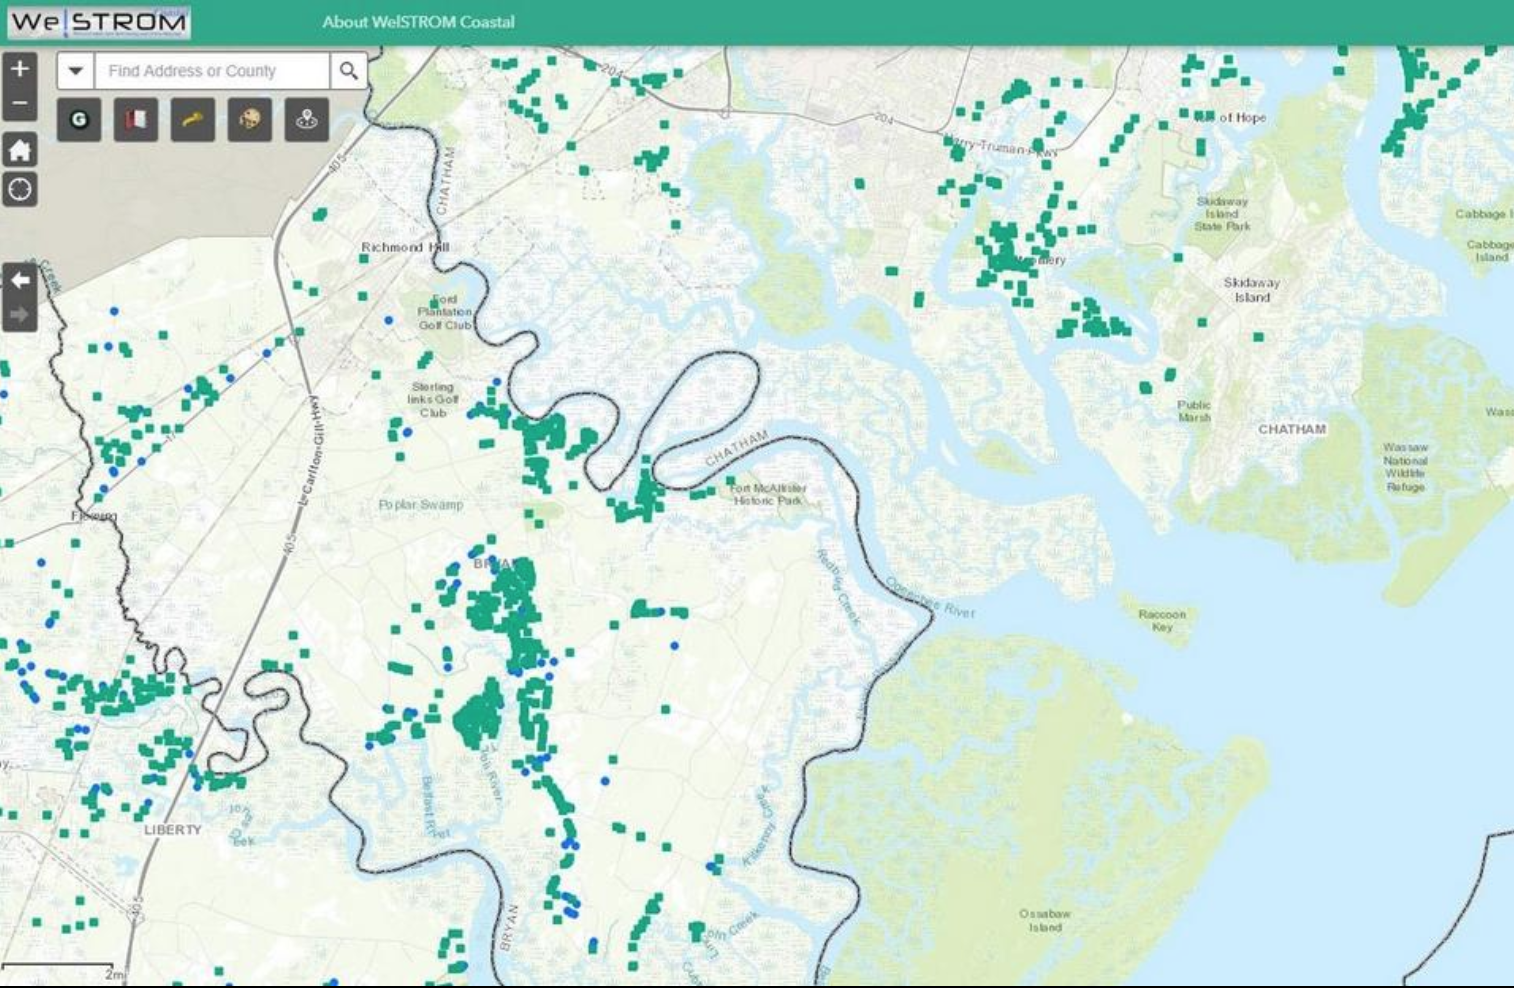 This screen grab of the Welstrom Coastal site shows septic systems as green squares and wells as blue dots. The database is publicly accessible at welstrom.com/coastal/. Screenshot courtesy of Savannah Morning News.